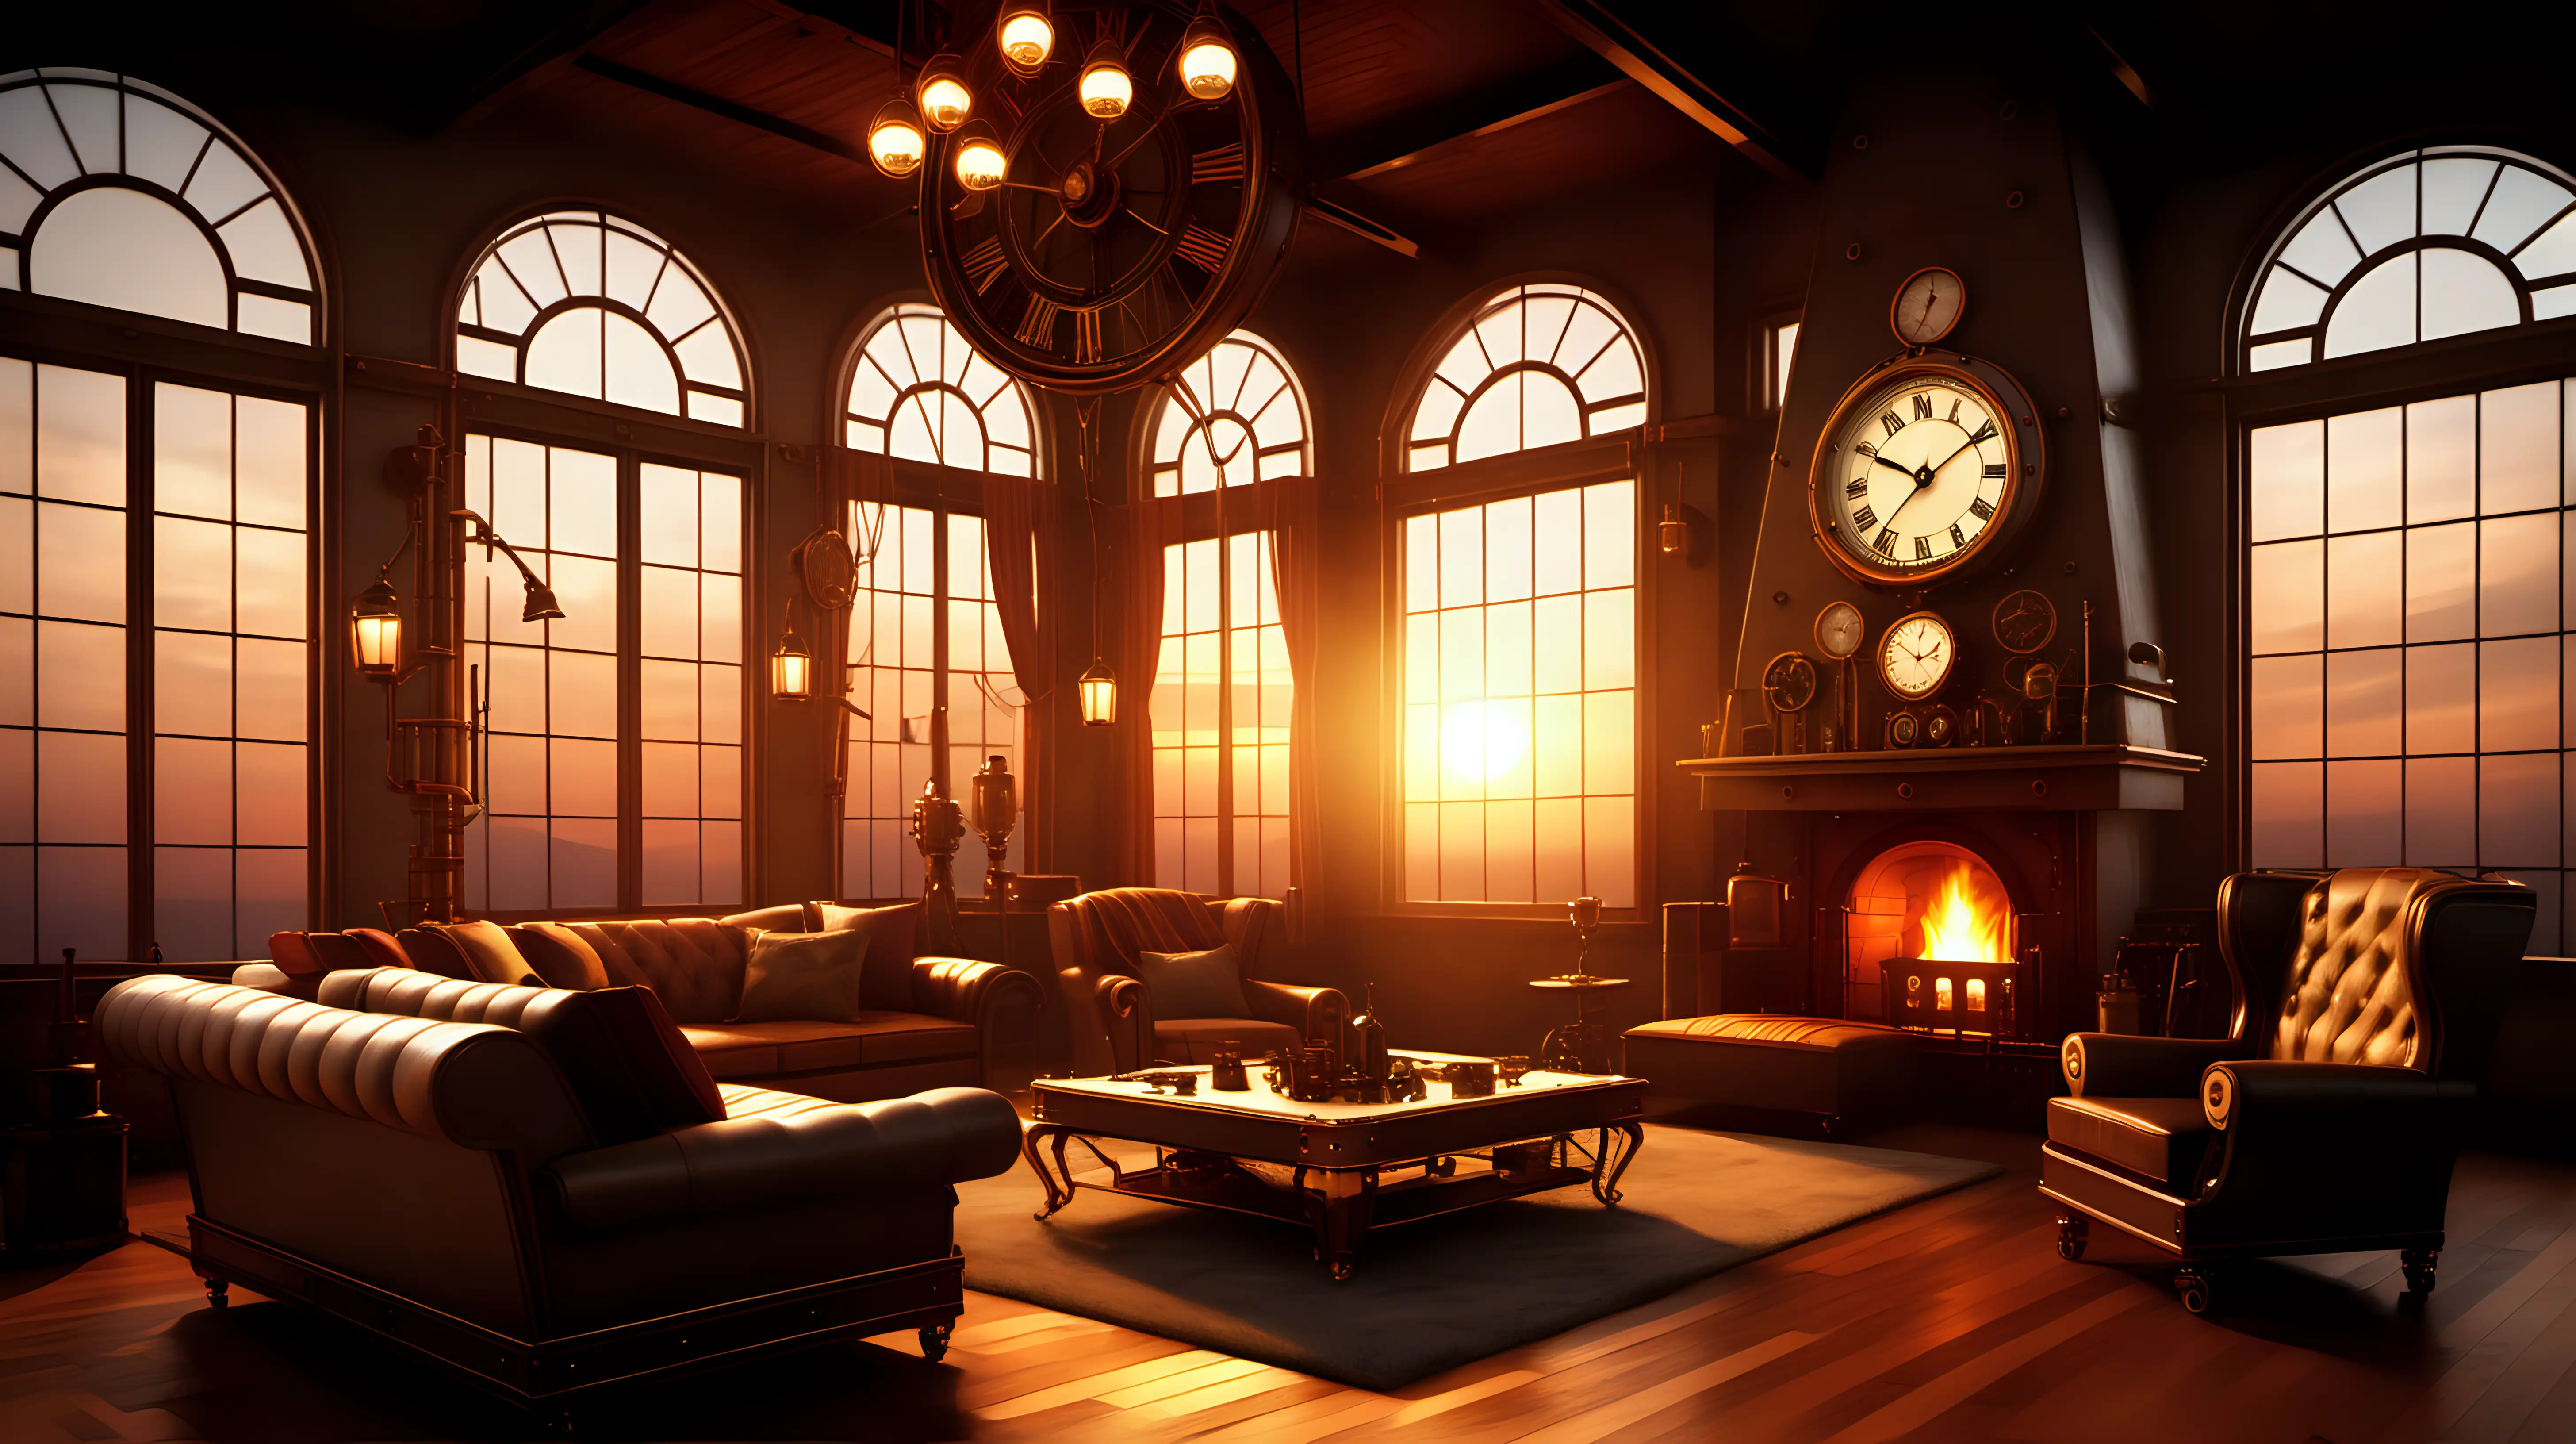 Steampunk Living Room with TwoStory Ceilings and Sunset Glow